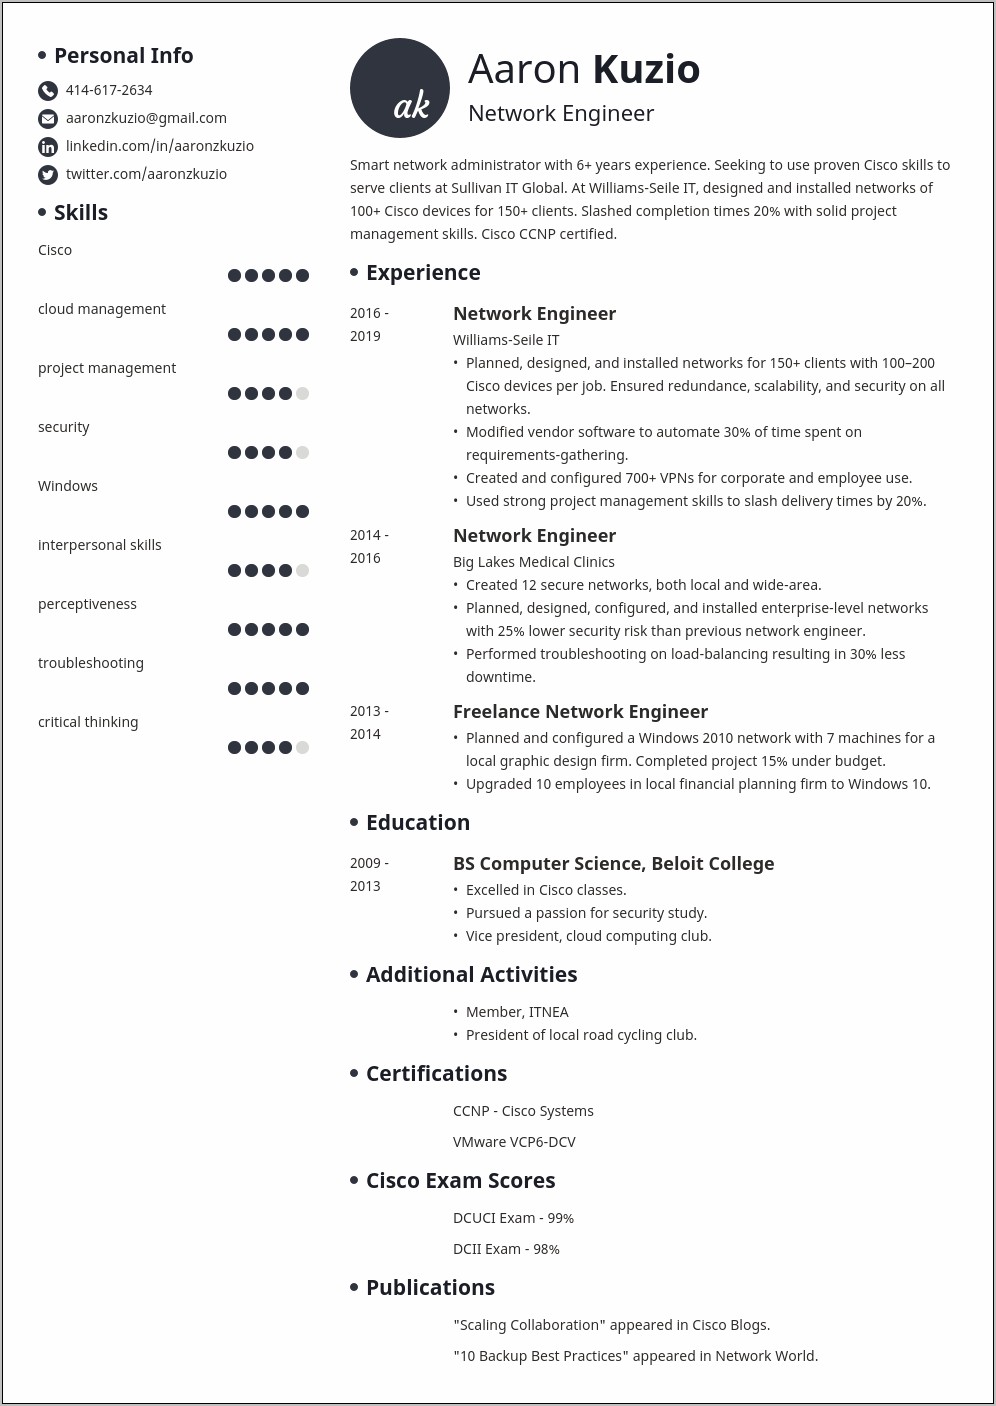 Sample Resume With Certifications Listed